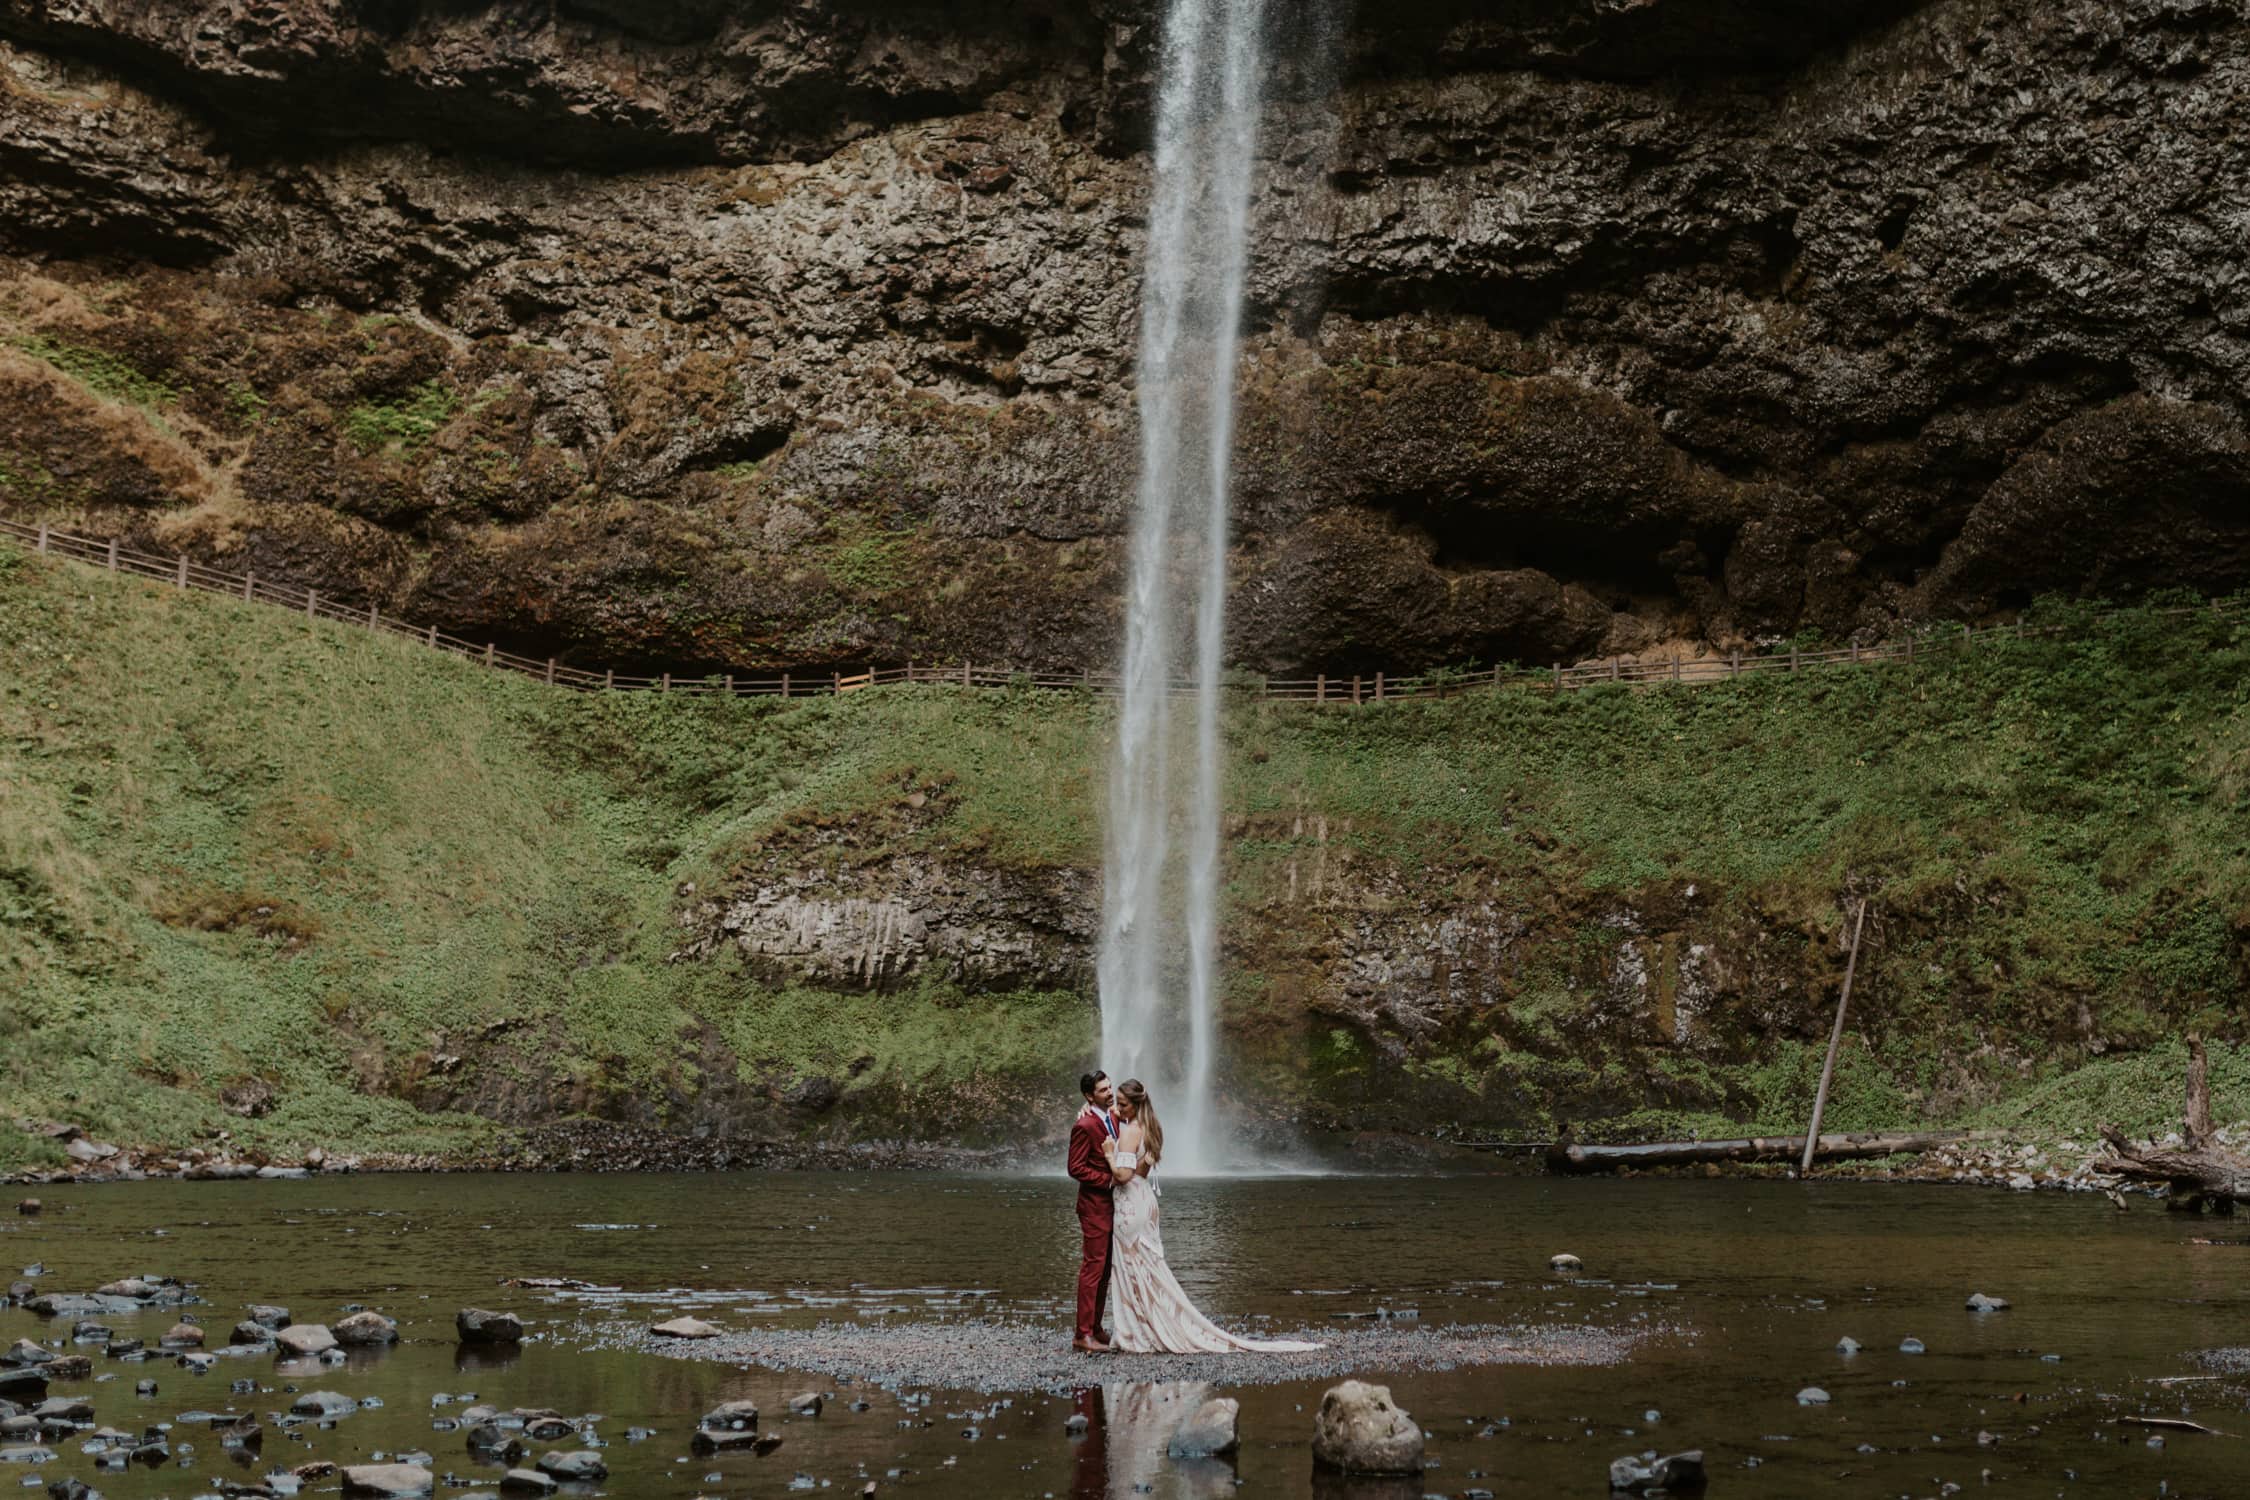 A couple eloping under a waterfall in Oregon.